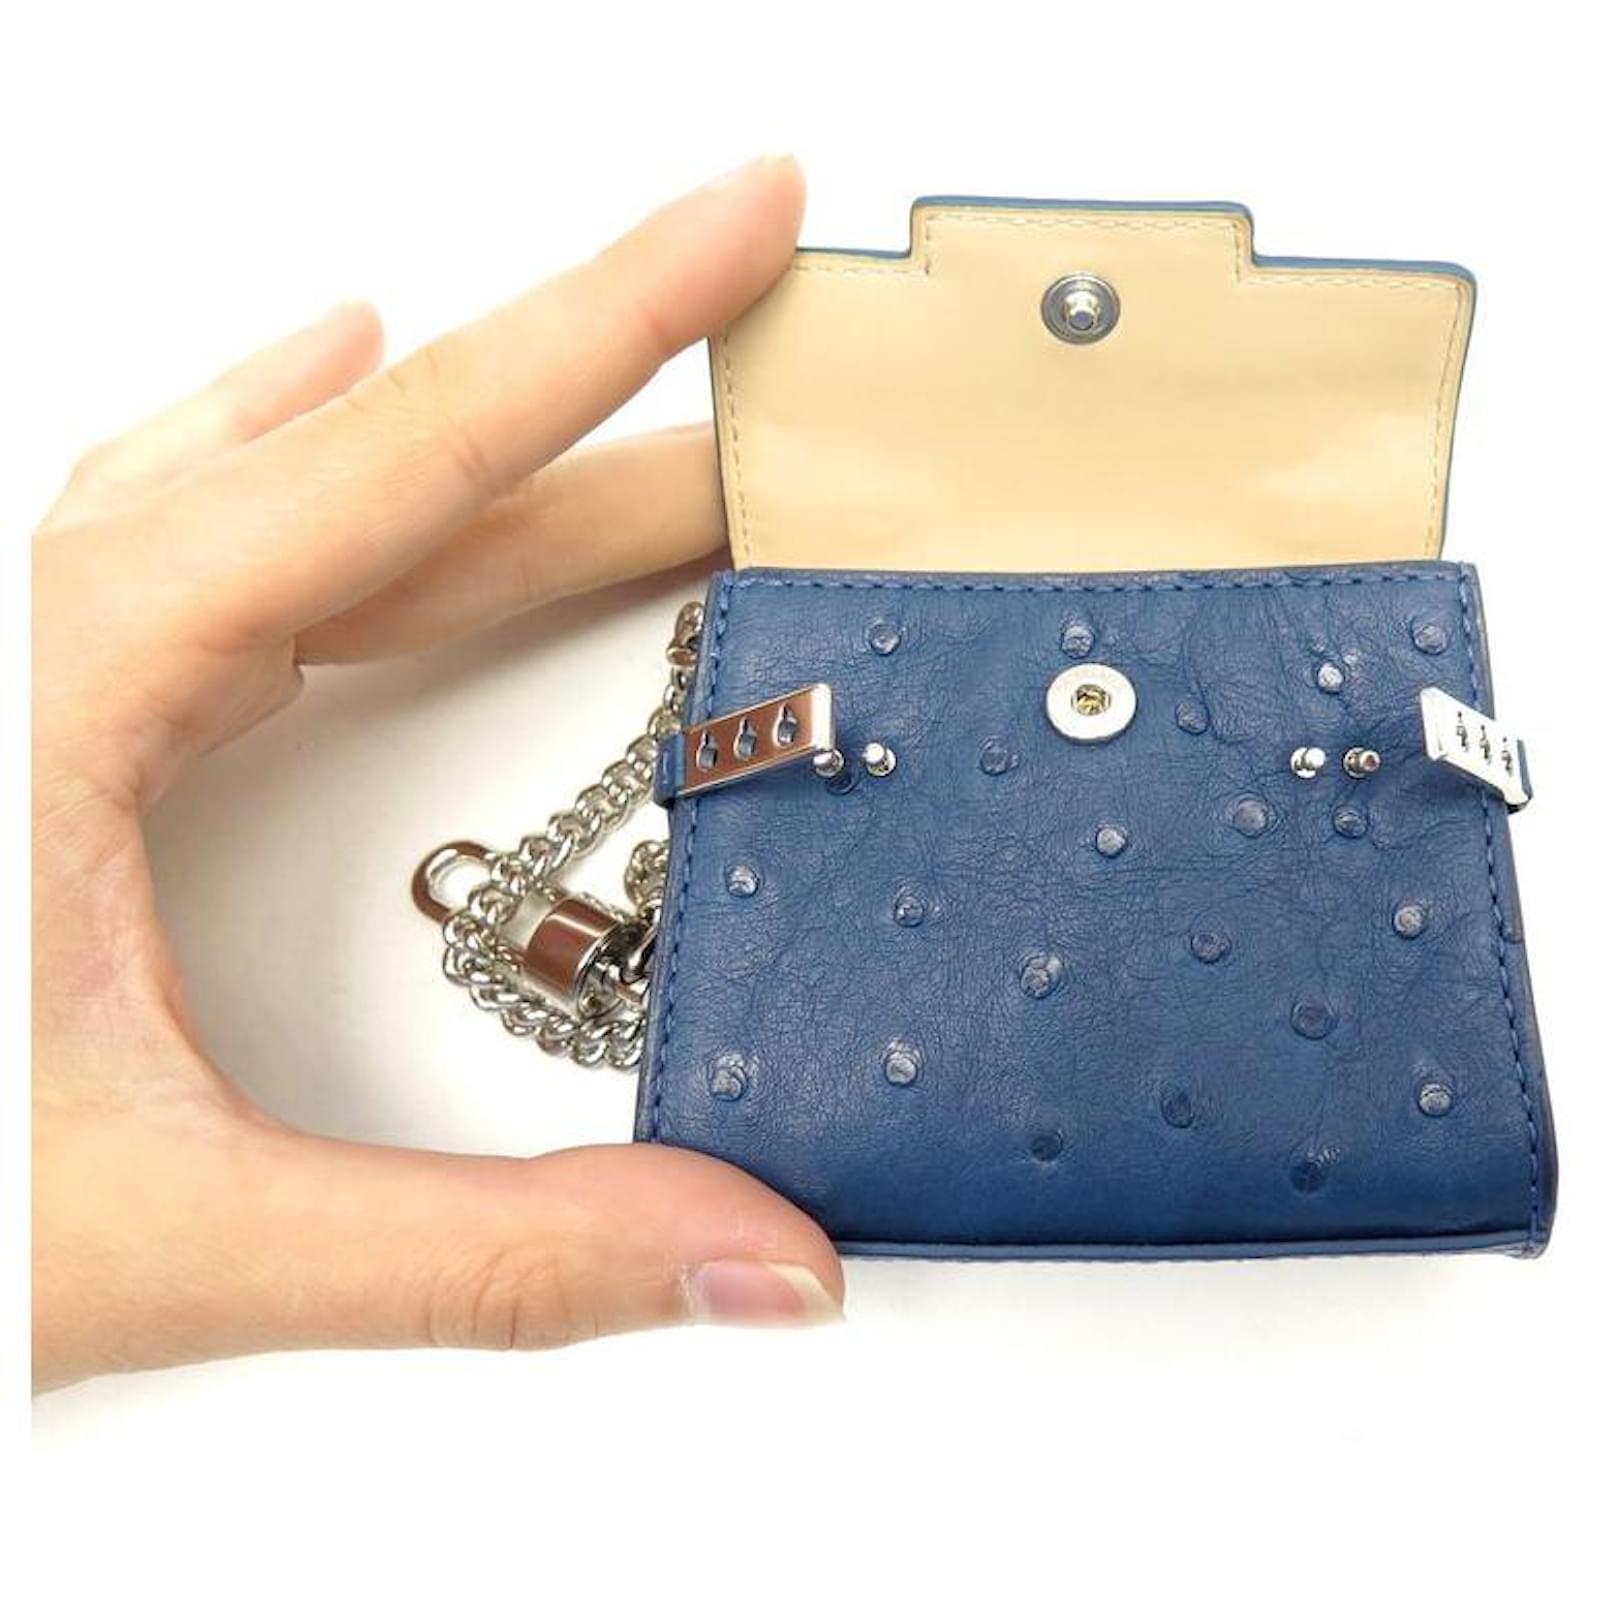 Delvaux Tempete Leather Bag Charm Key Ring